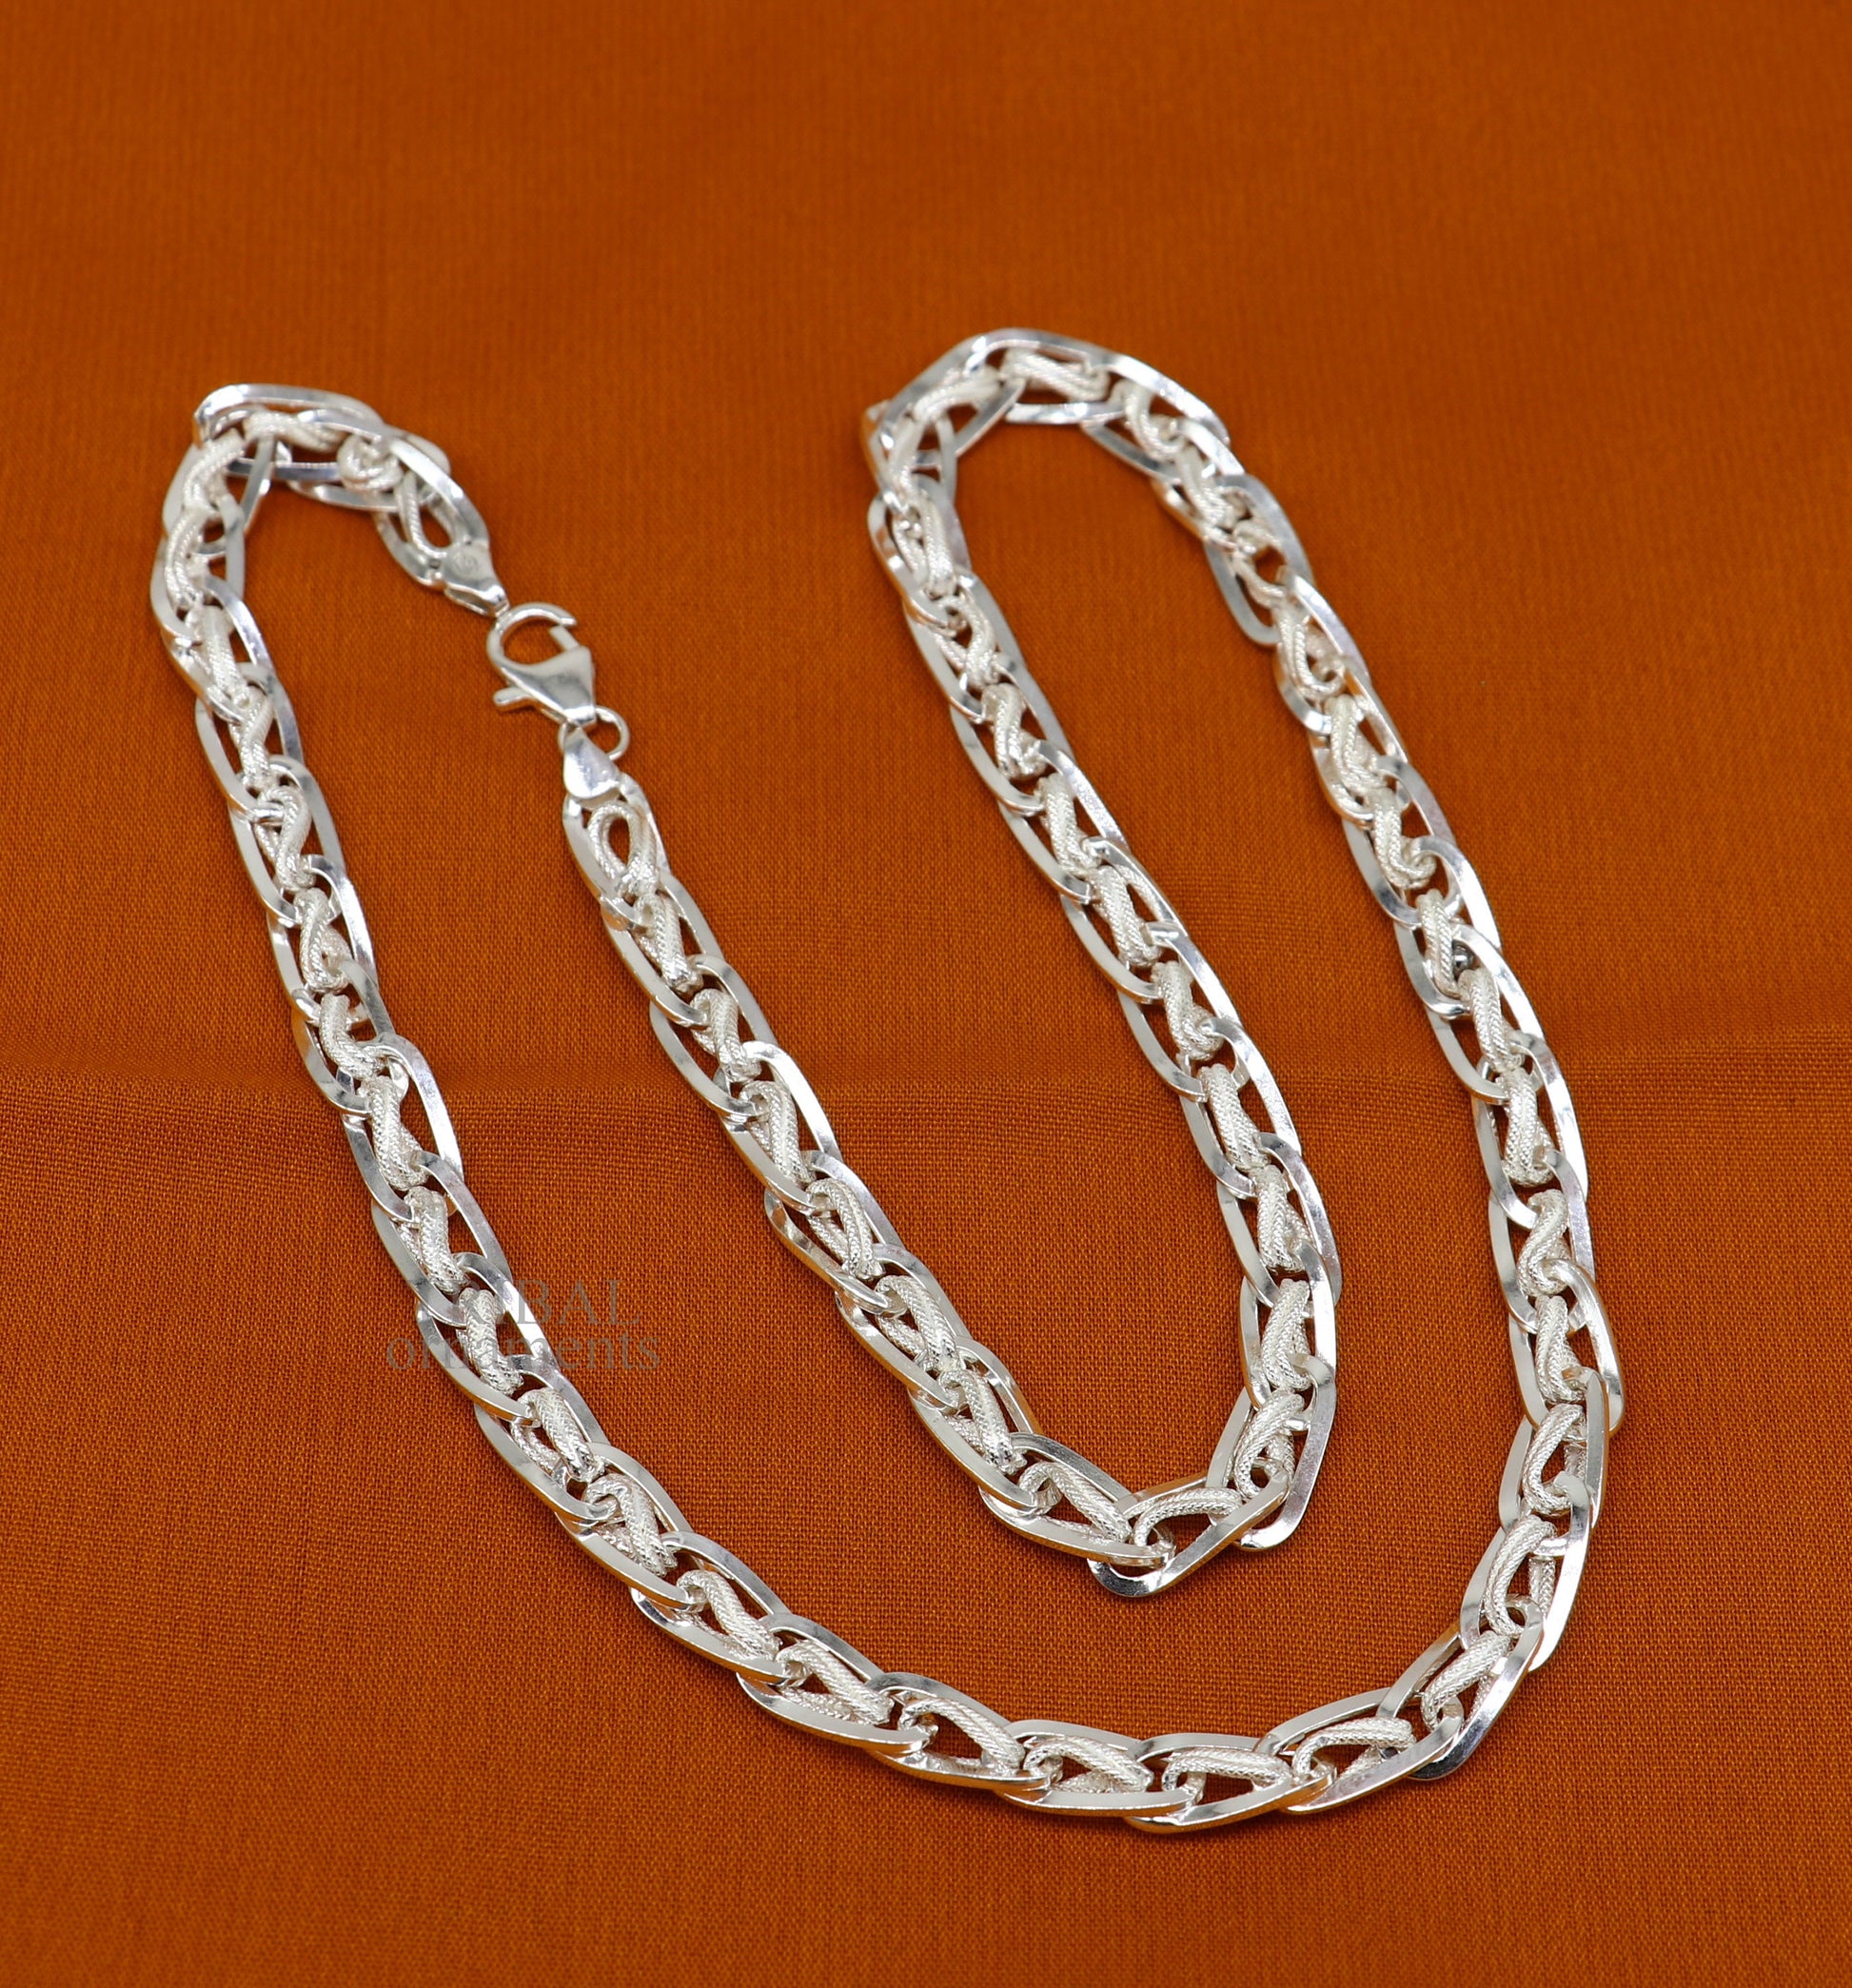 Exclusive unique stylish 21" 925 sterling silver 7mm handmade amazing chain necklace excellent gifting jewelry, men's chain necklace nch333 - TRIBAL ORNAMENTS